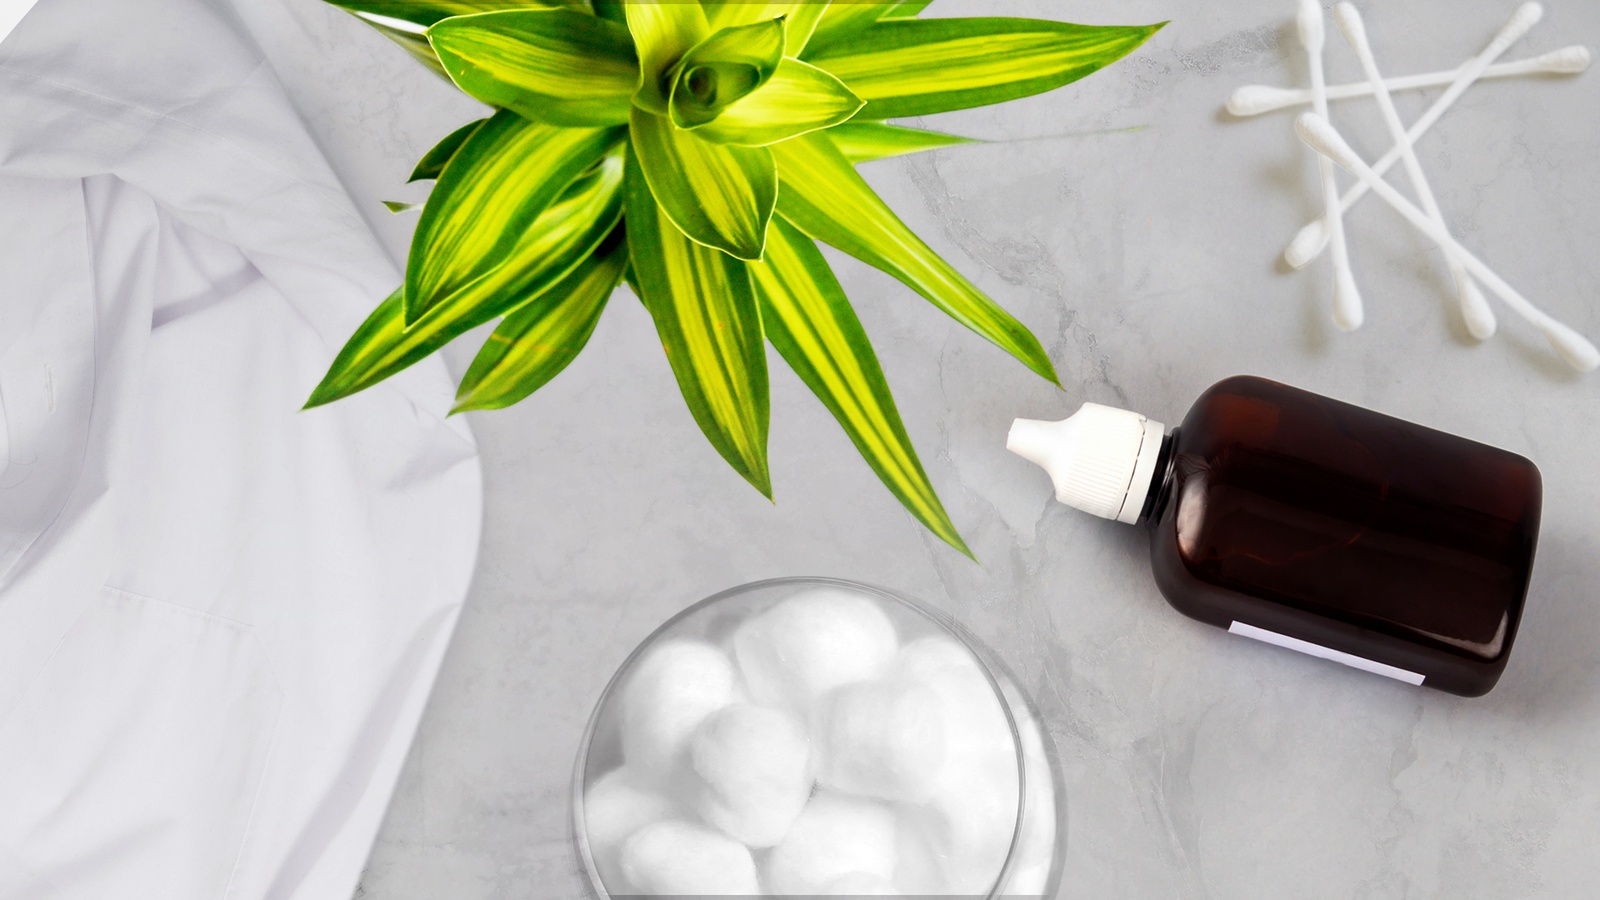 6 Surprising Uses of Hydrogen Peroxide